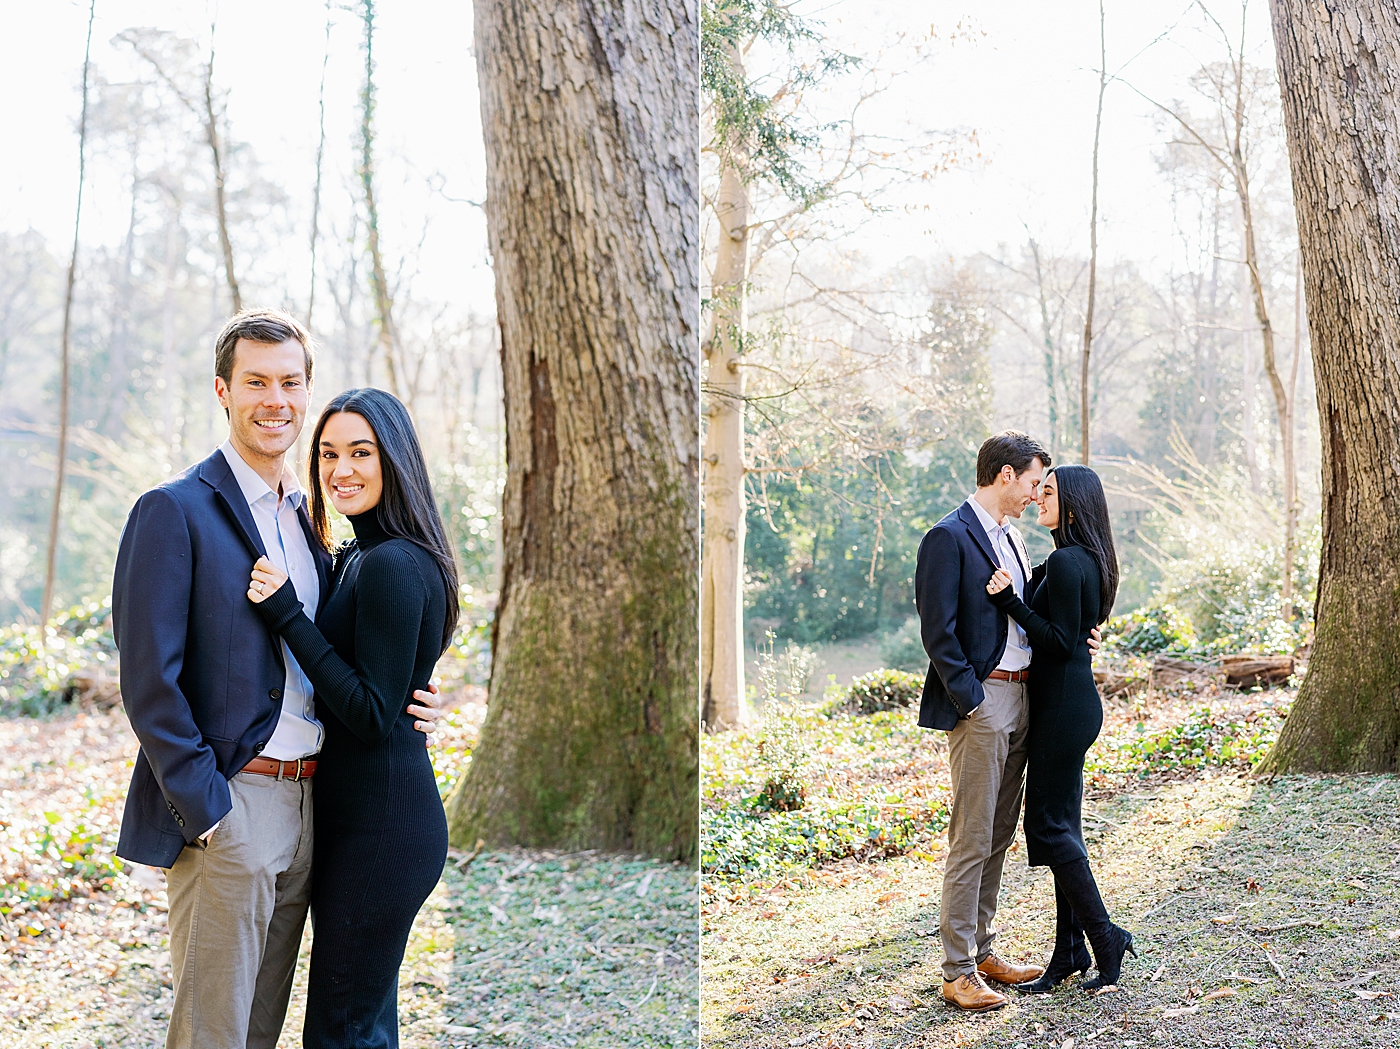 Couple in navy and black hugging in the woods | Image by Annie Laura Photo